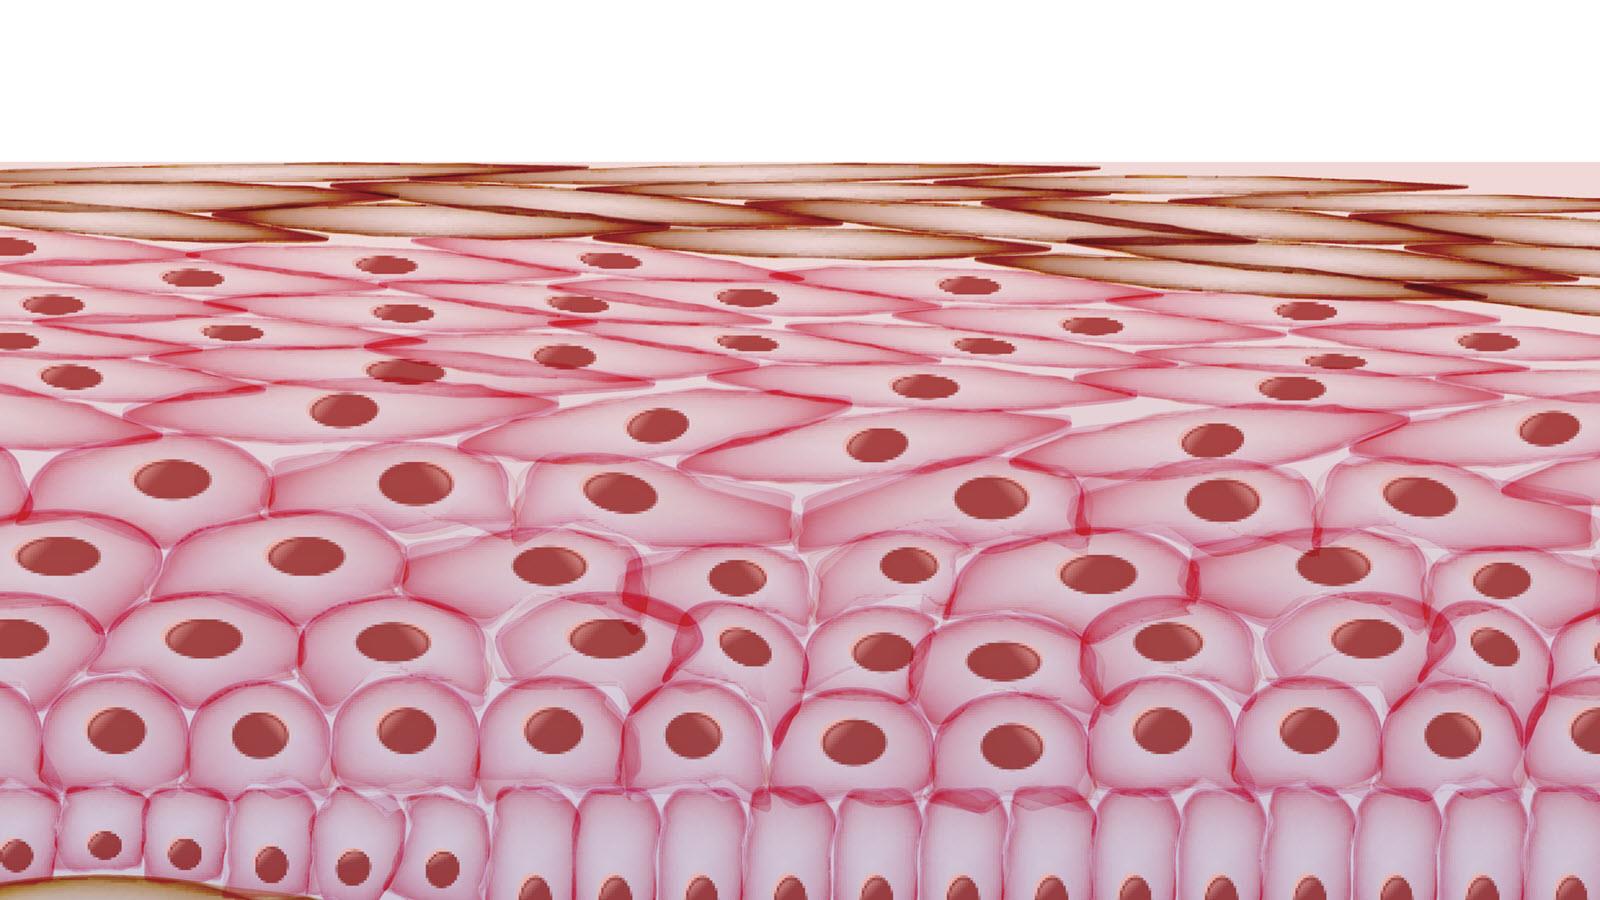 Skin cells layered in the skin